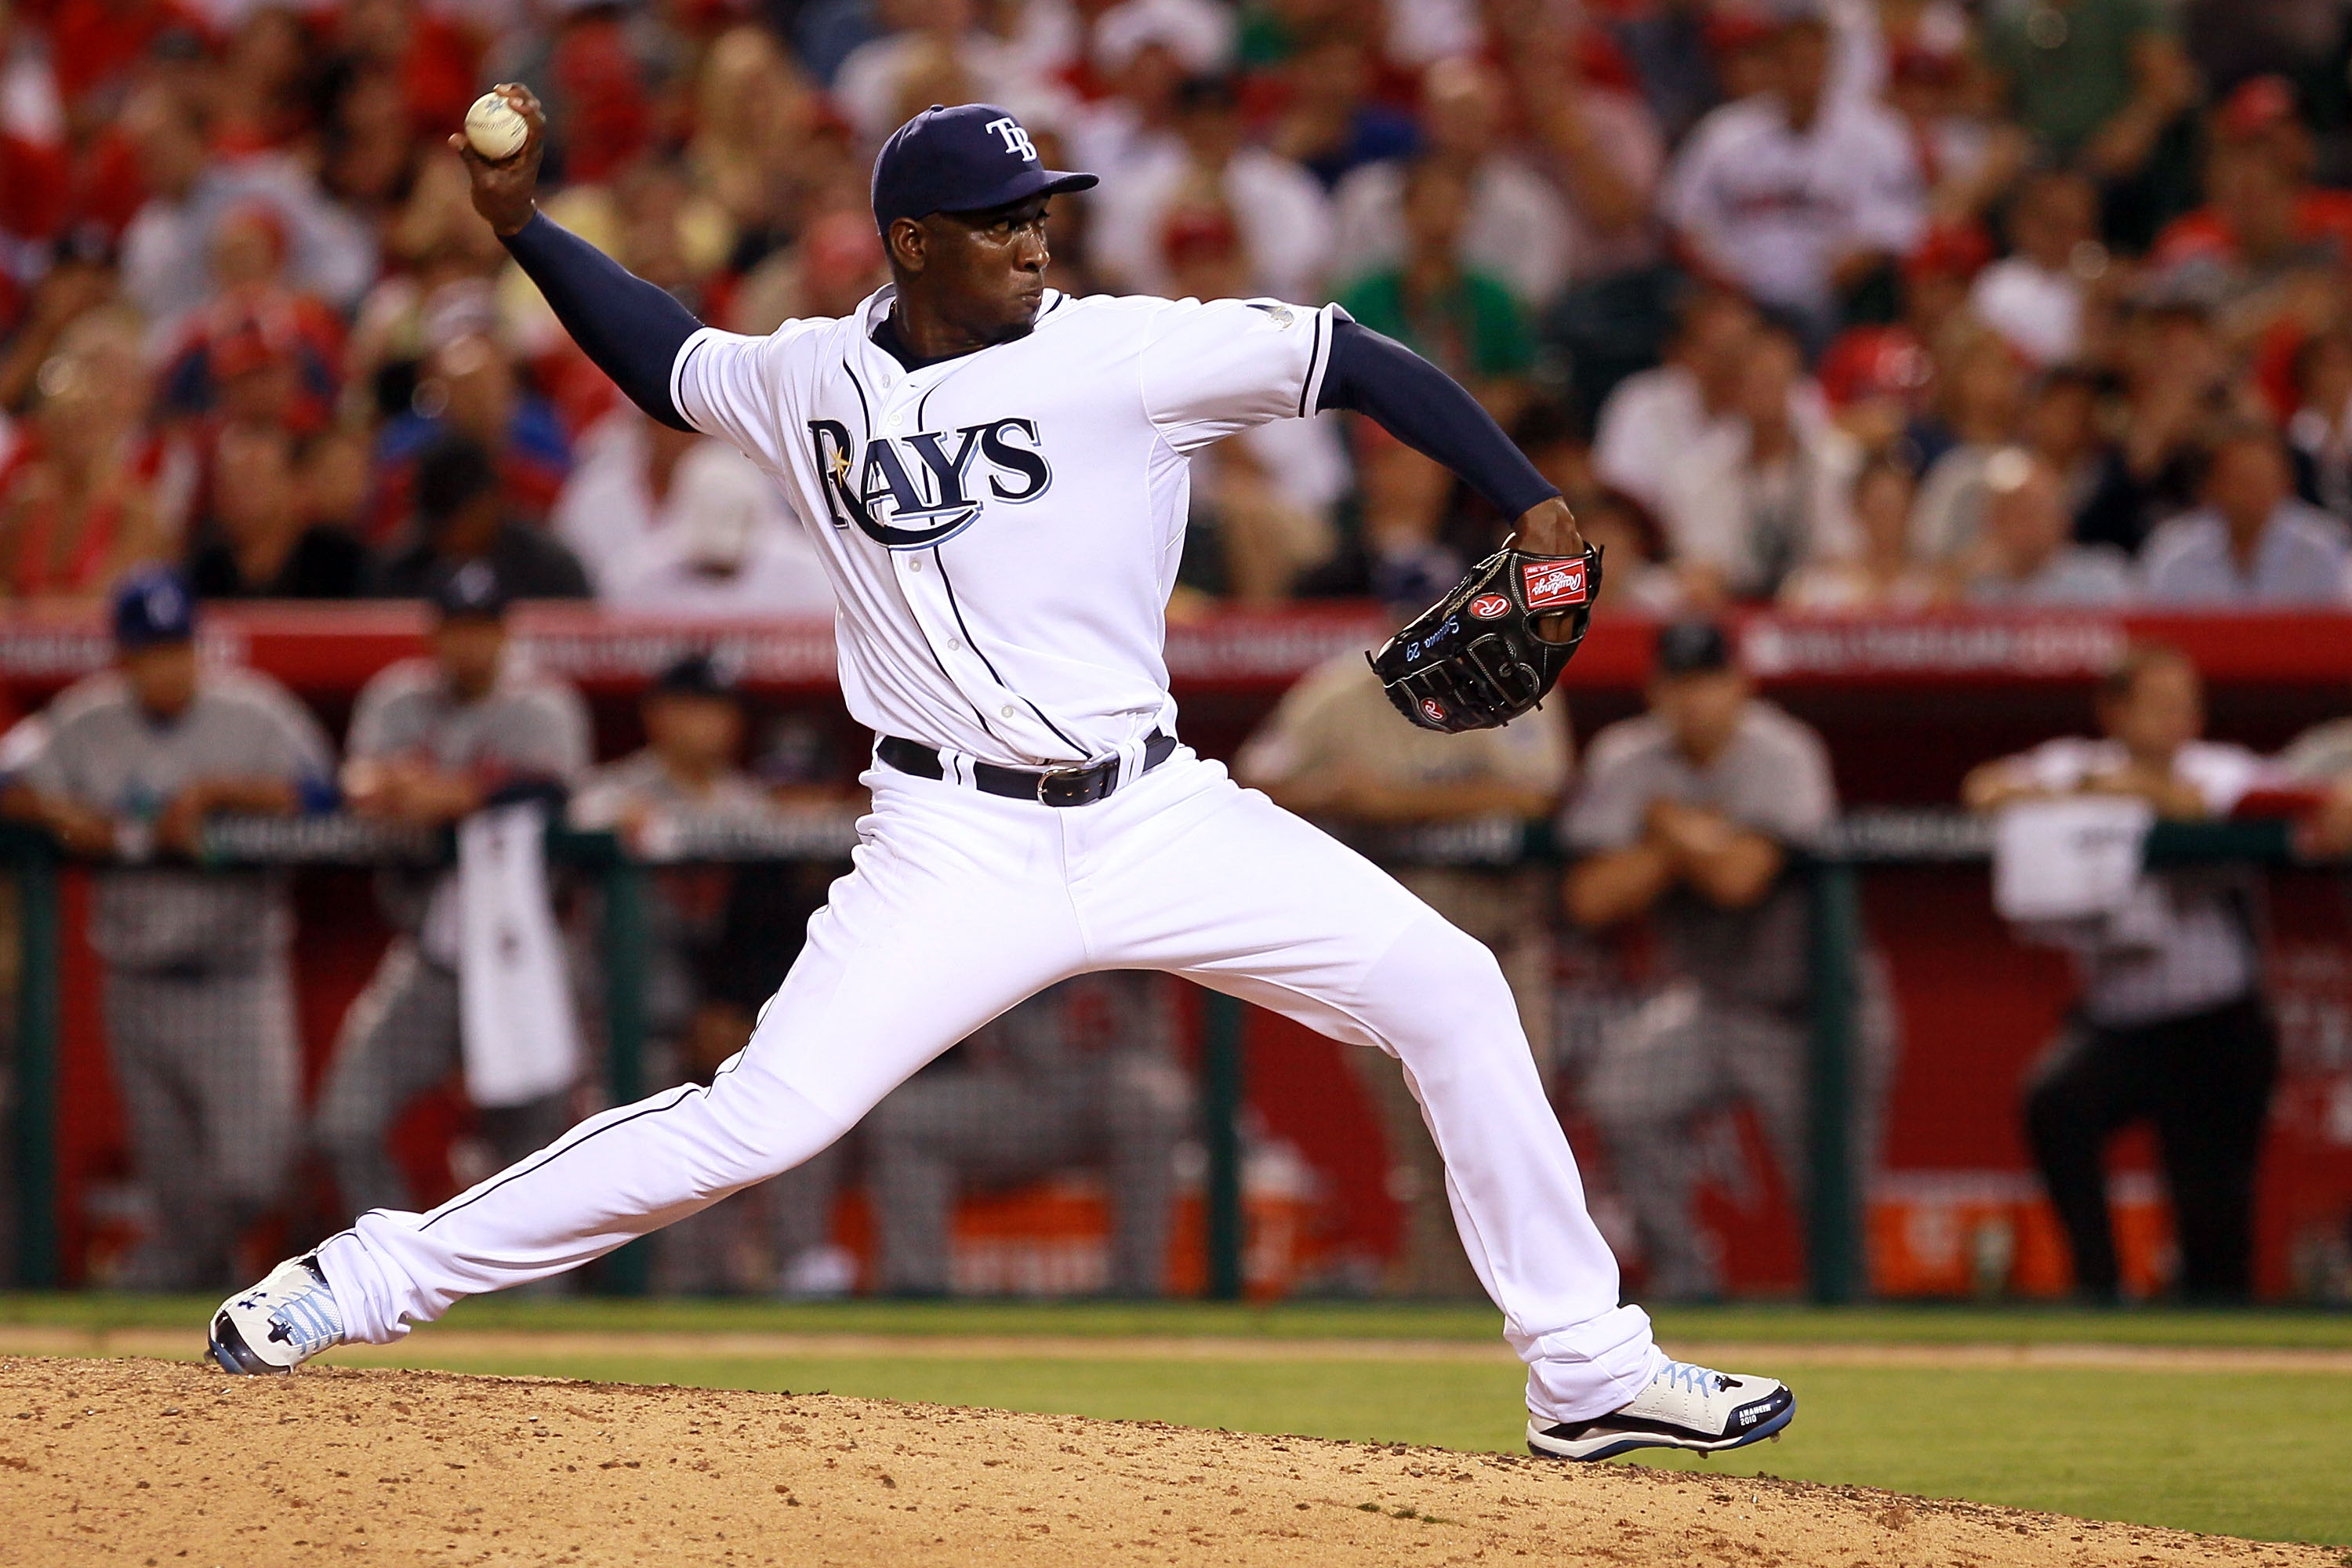 ANAHEIM, CA - JULY 13:  American League All-Star Rafael Soriano of the Tampa Bay Rays throws a pitch during the 81st MLB All-Star Game at Angel Stadium of Anaheim on July 13, 2010 in Anaheim, California.  (Photo by Jeff Gross/Getty Images)